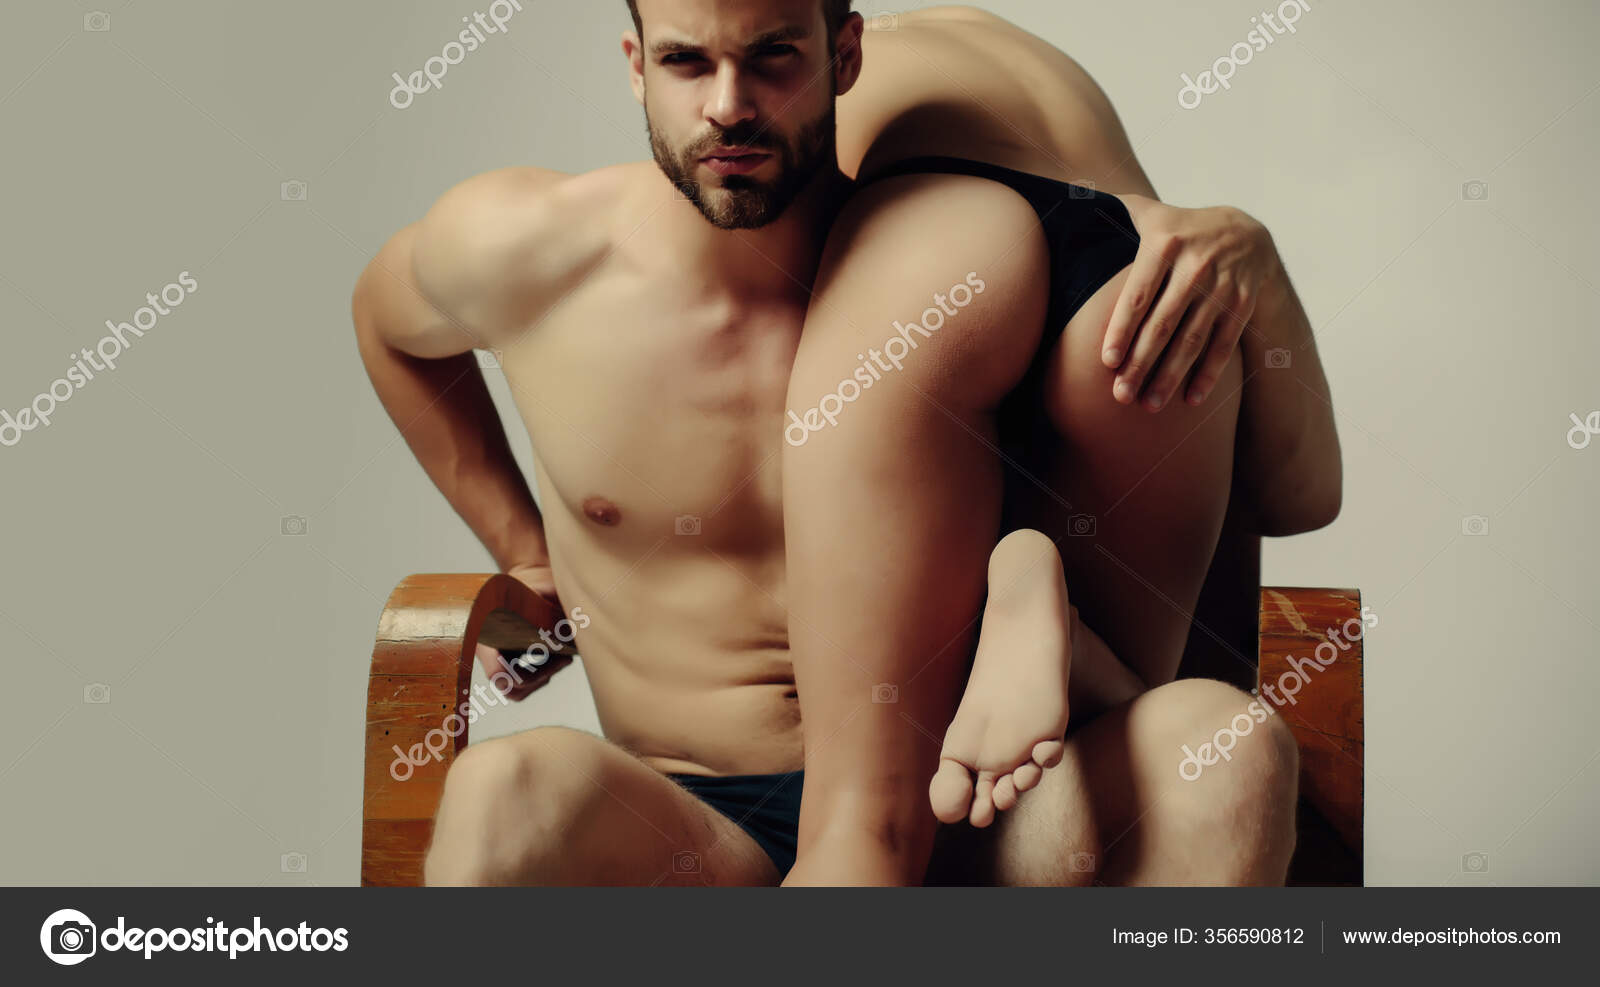 Brutal muscular bearded man touching girls sexy ass. Handsome dominating man going to give his sexy girl a smack. Foreplay and sex games concept. Couple full of desire pic